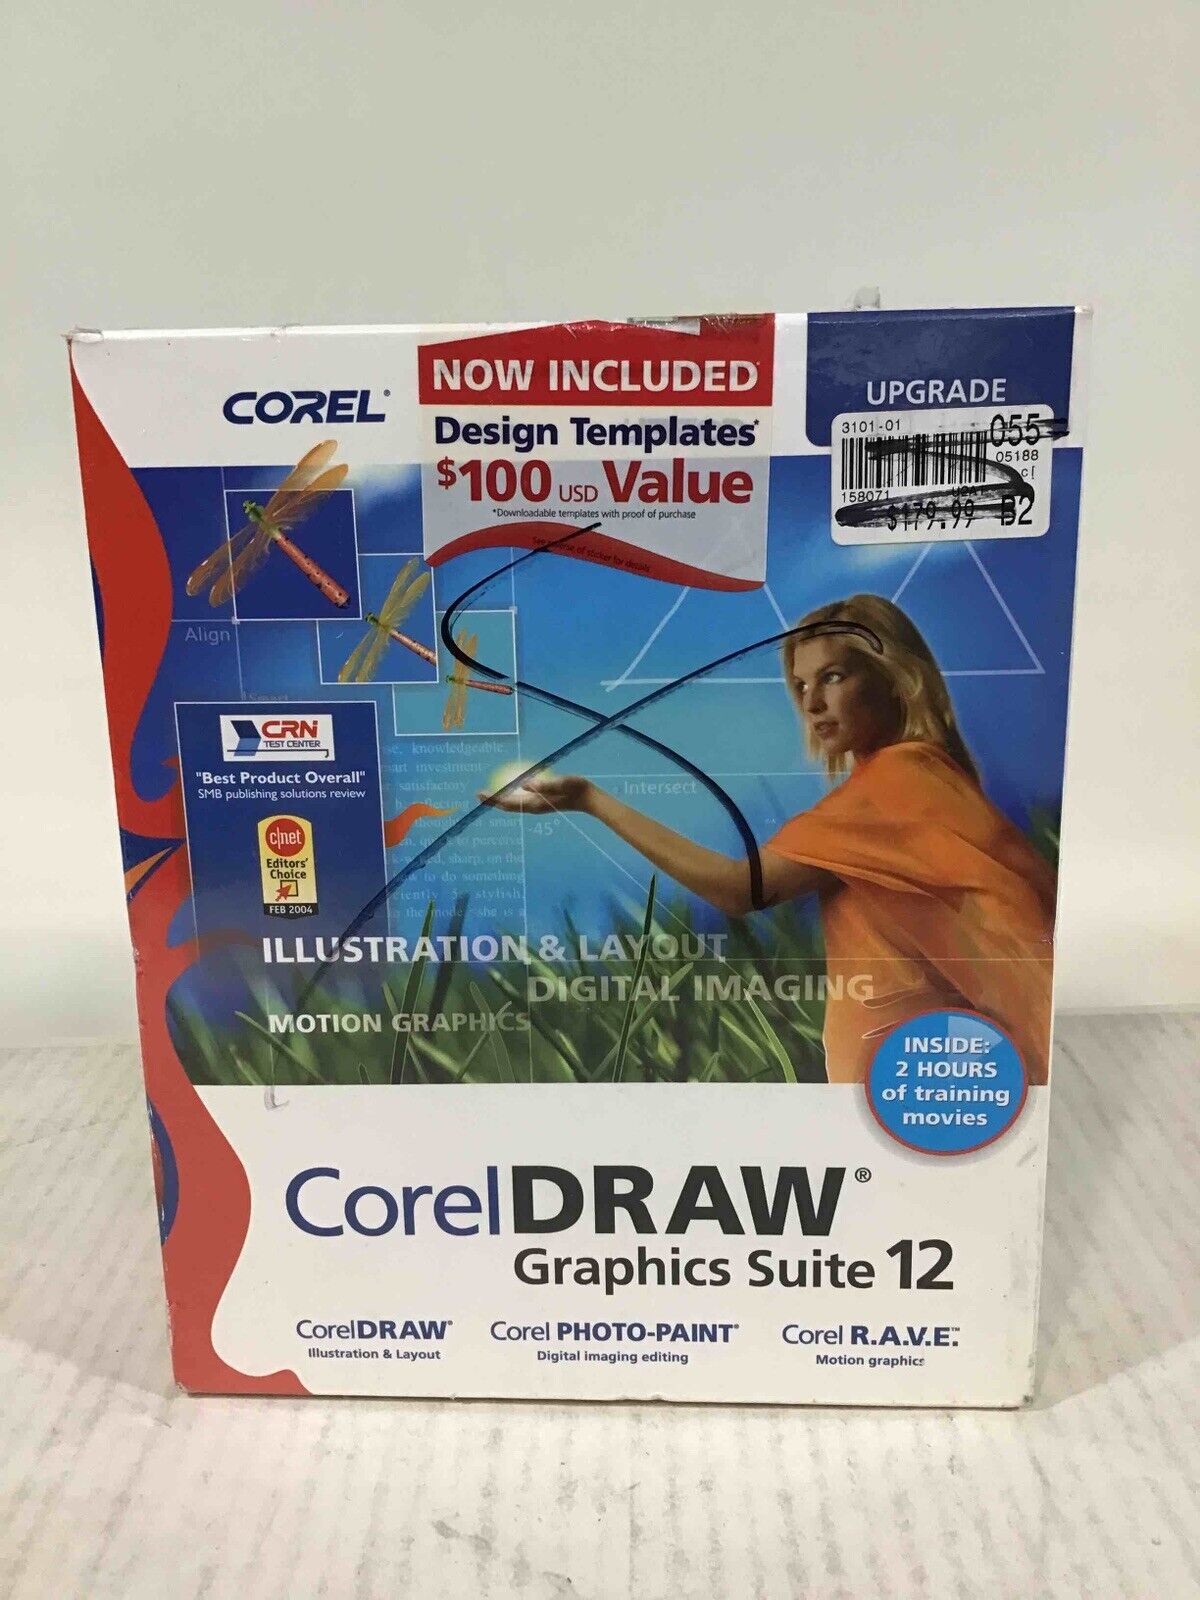 CorelDraw Graphics Suite 12 Upgrade.  Includes 2 Hours Of Training Videos.